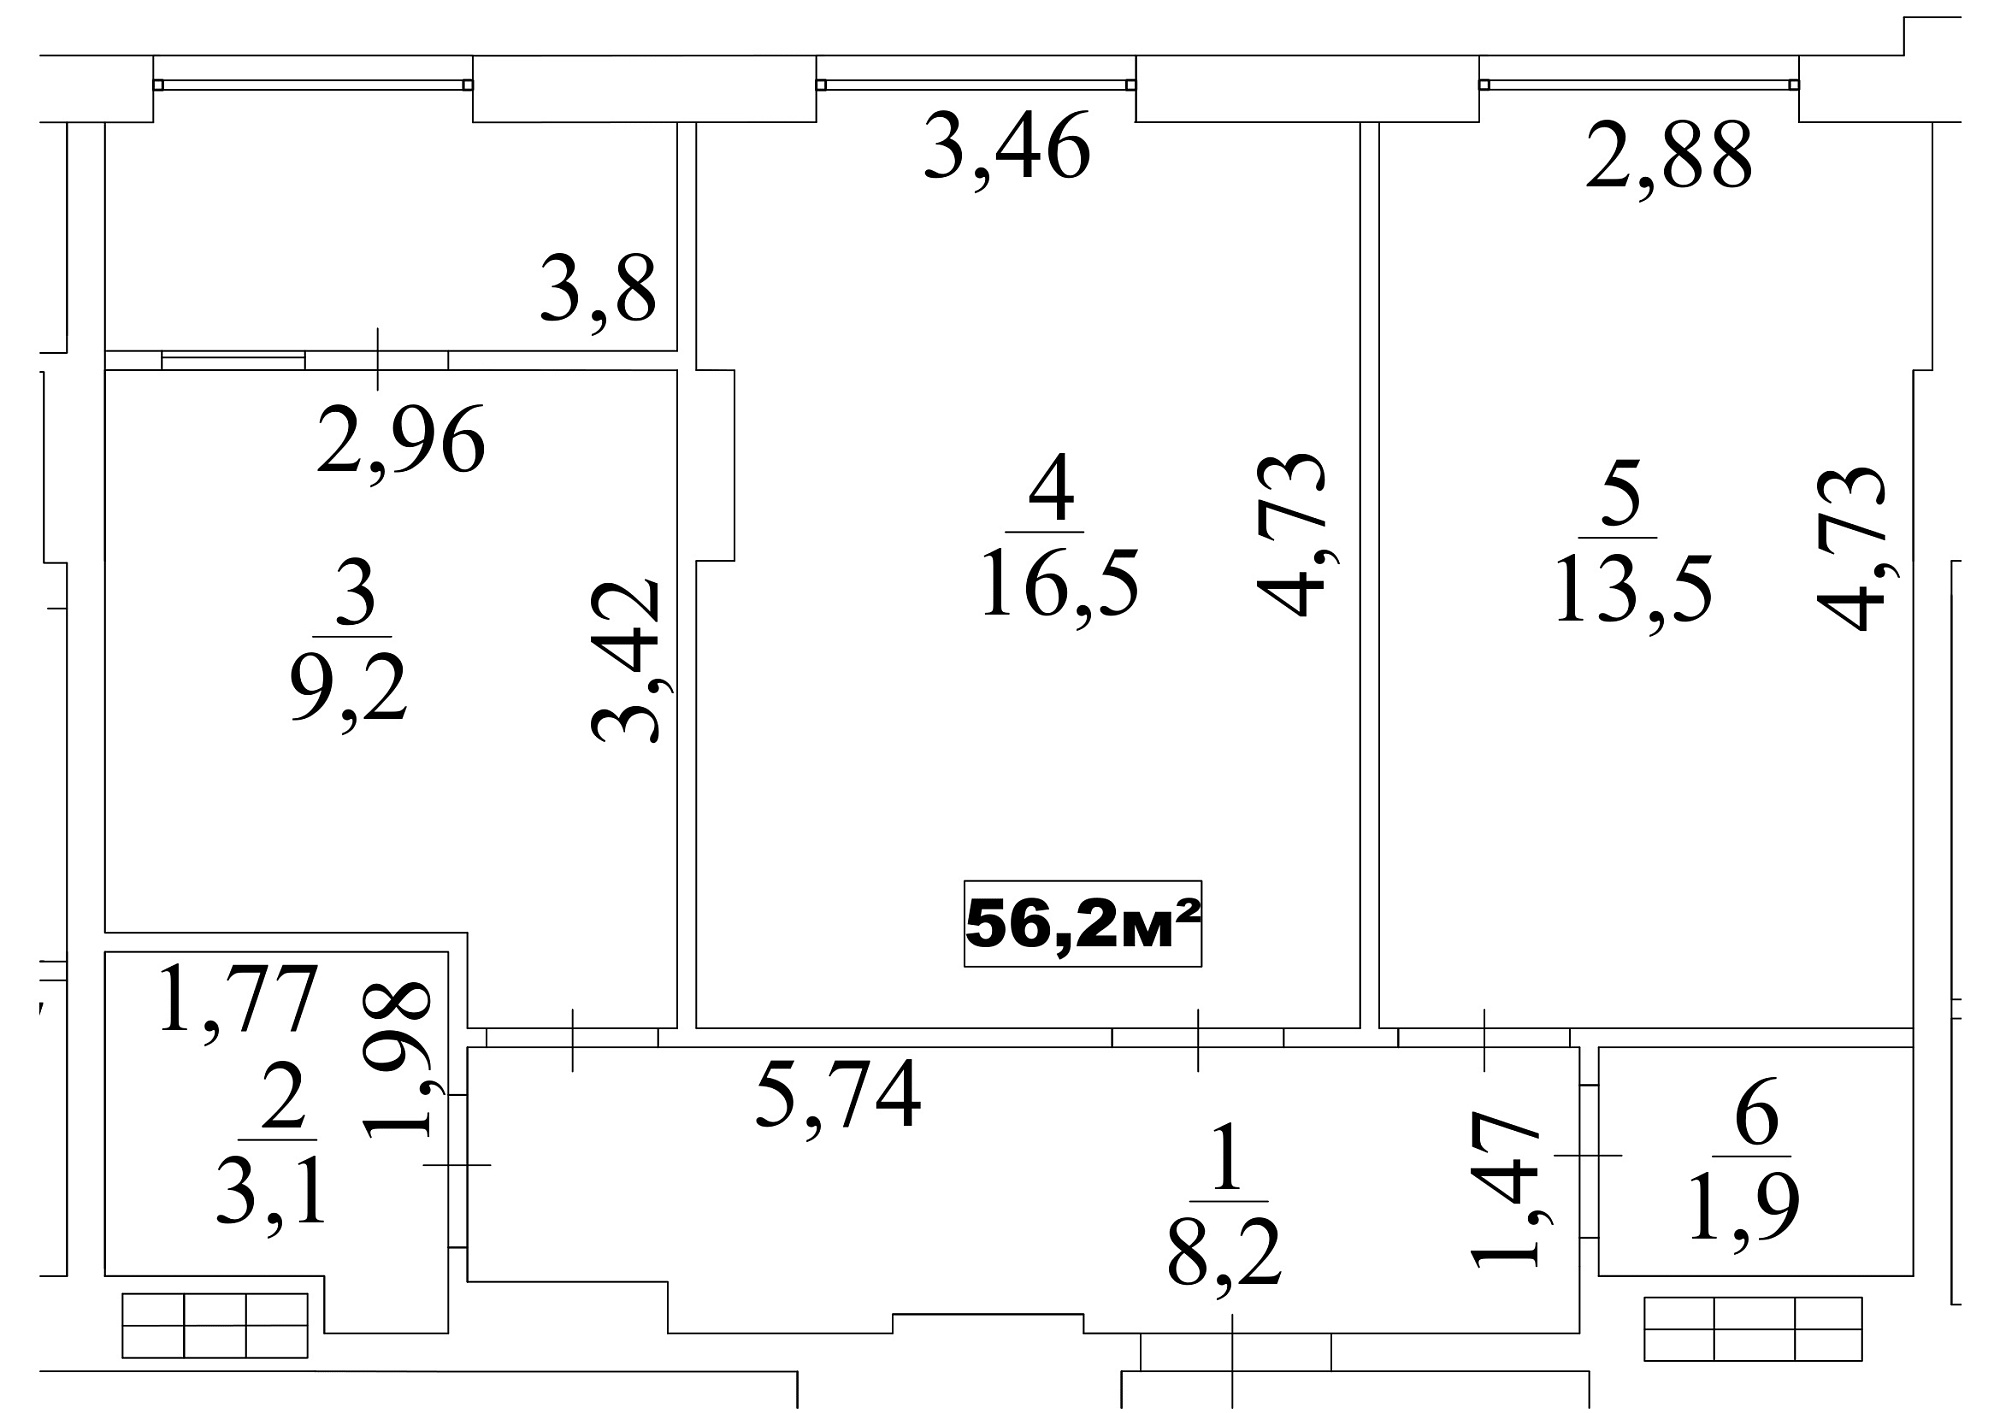 Planning 2-rm flats area 56.2m2, AB-10-03/00022.